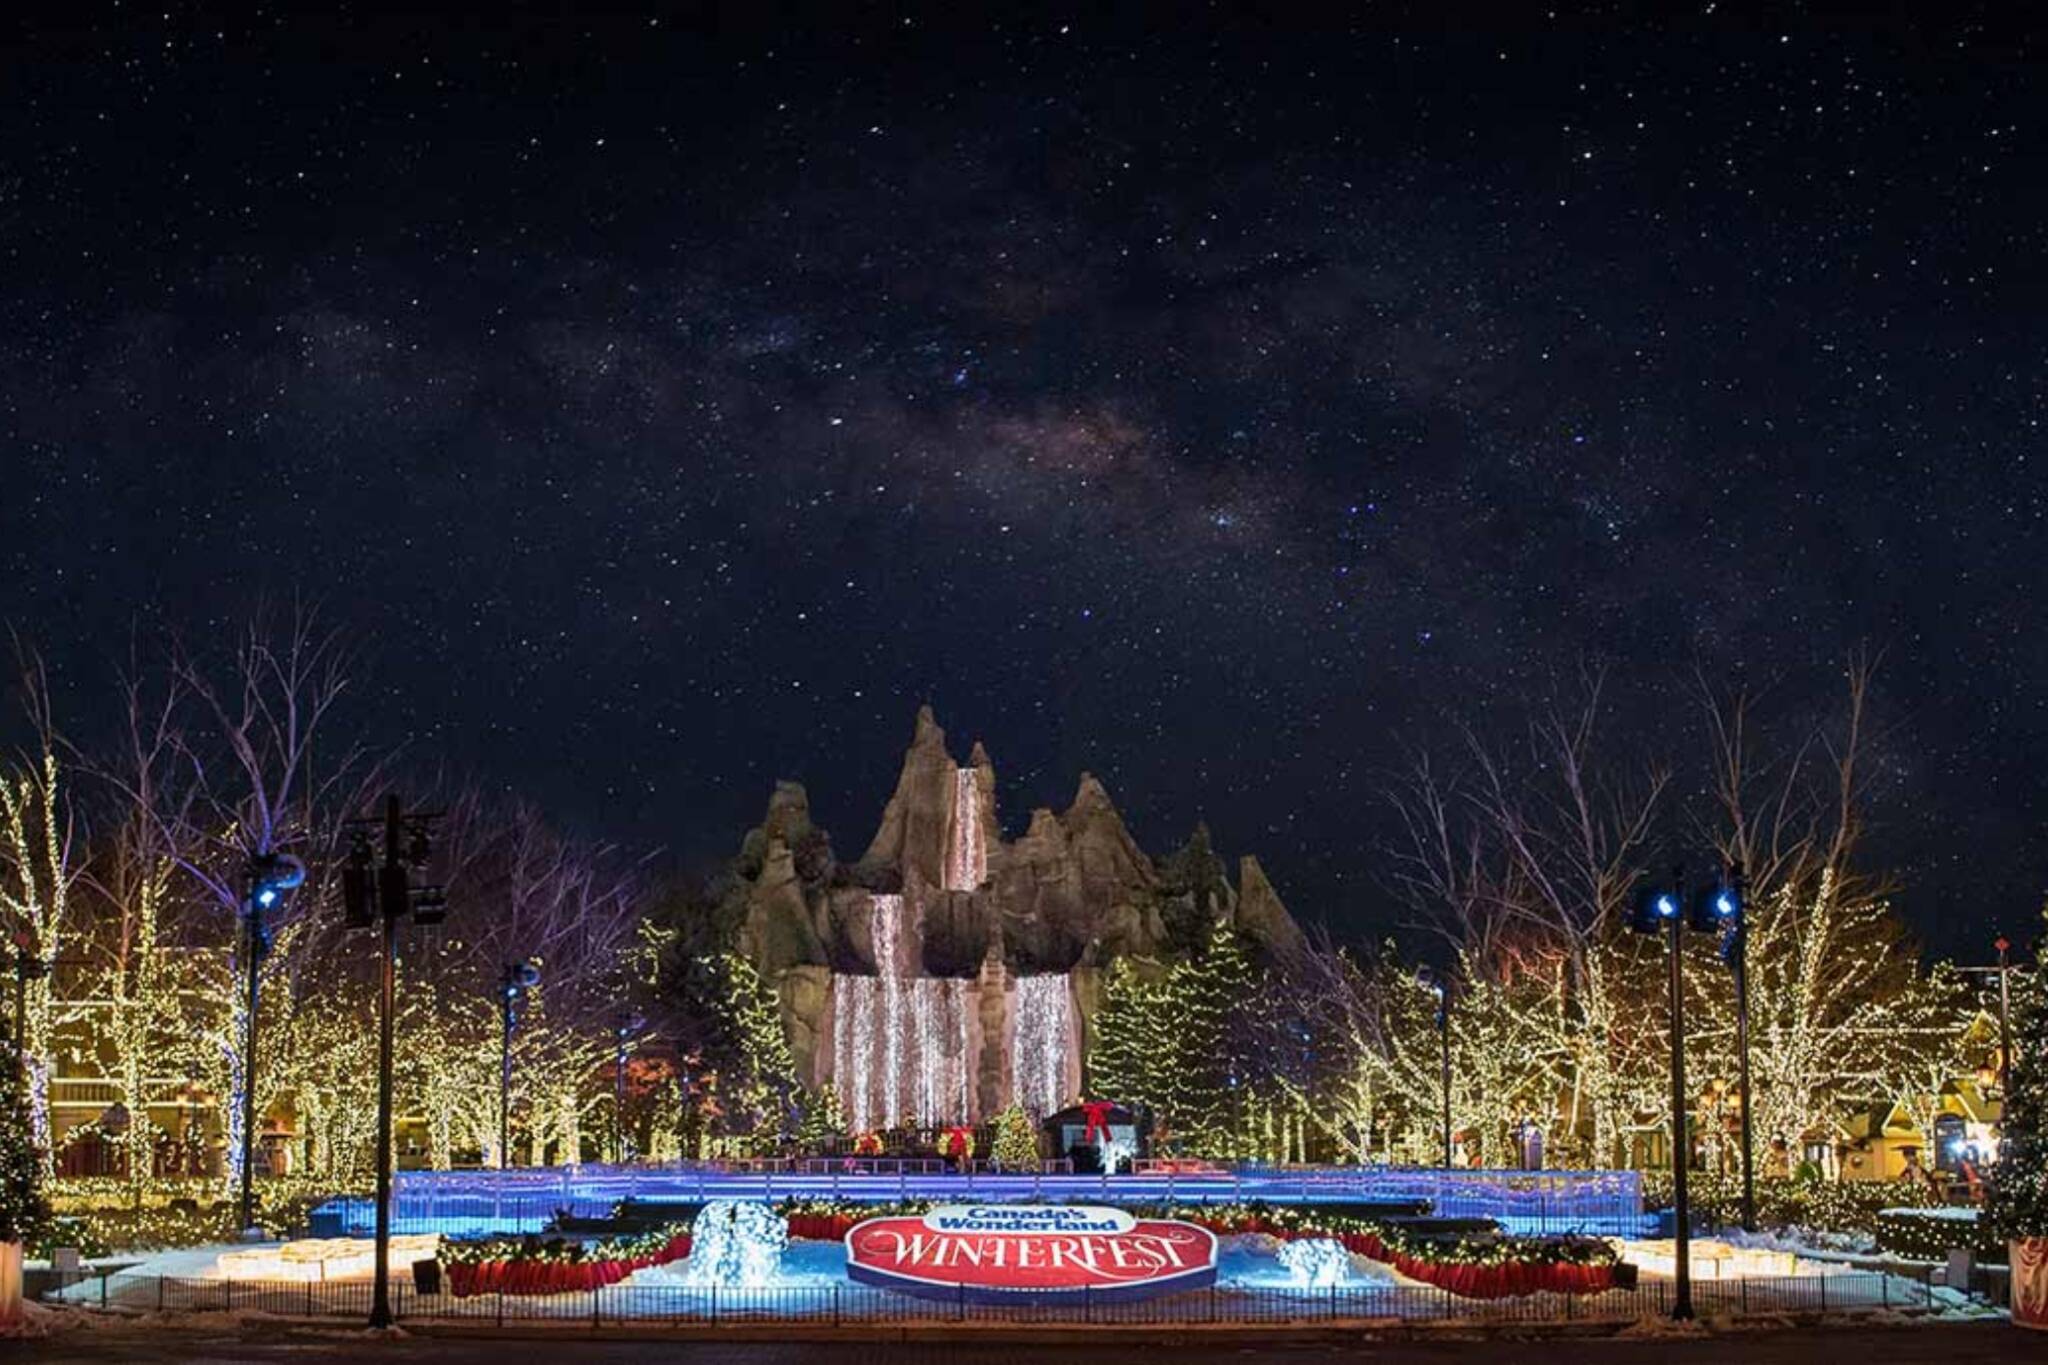 There's a massive winter festival coming to Canada's Wonderland